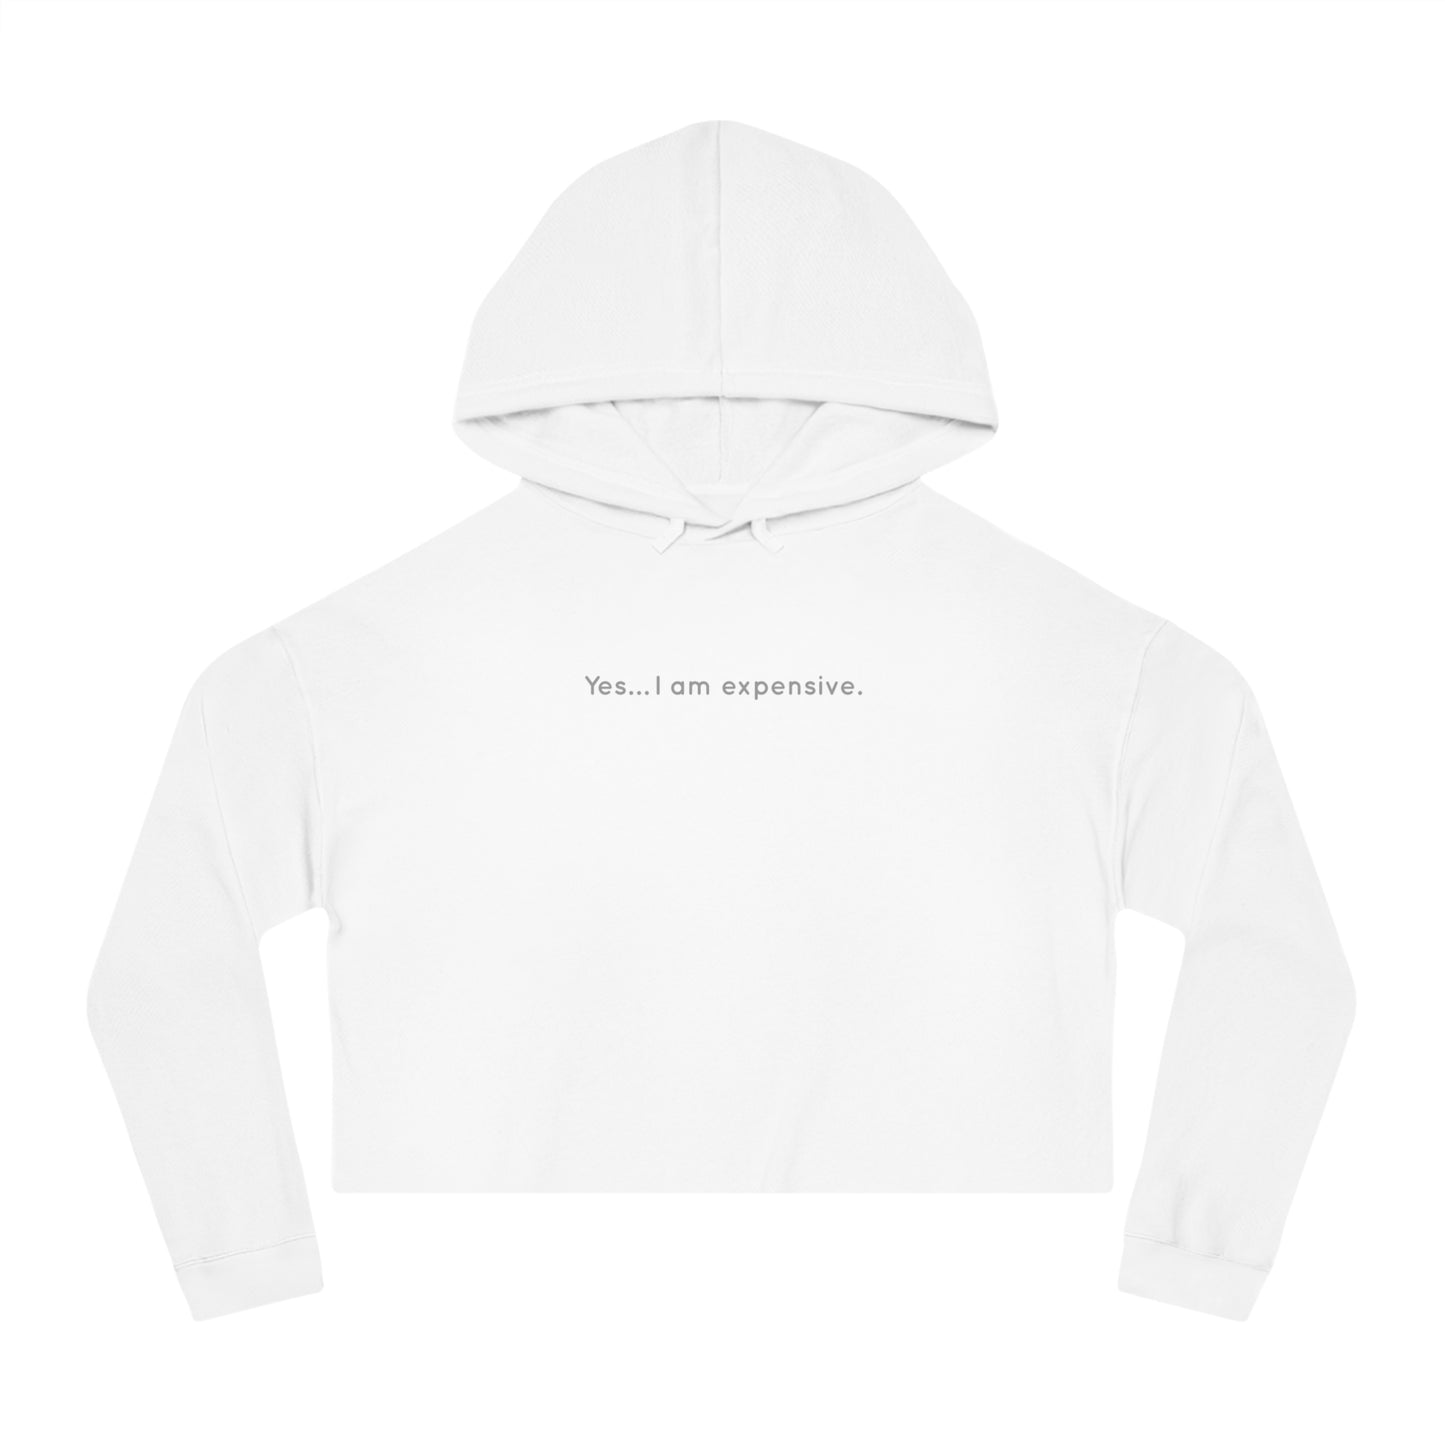 "Yes… I am expensive".  - Women’s Cropped Hooded Sweatshirt